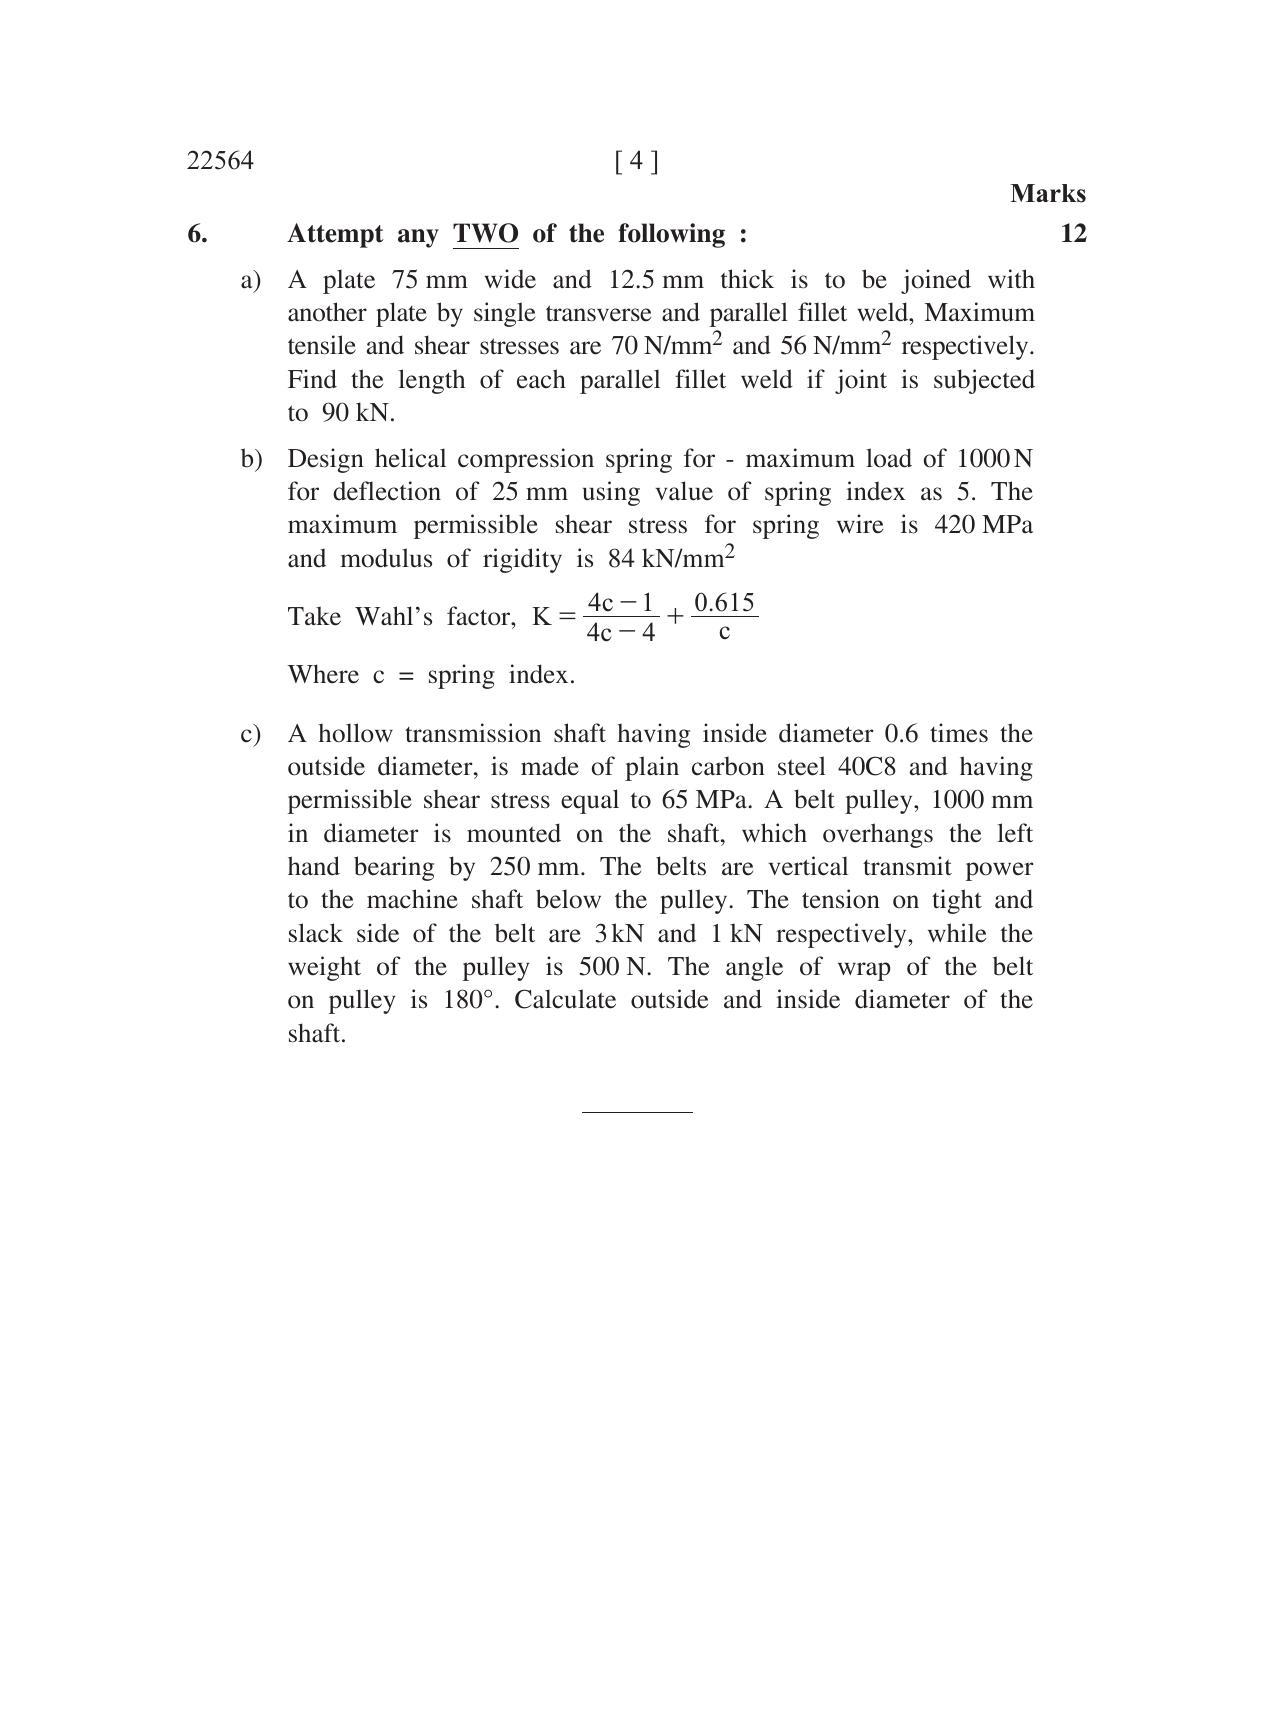 MSBTE Question Paper - 2019 - Elements of Machine Design - Page 4